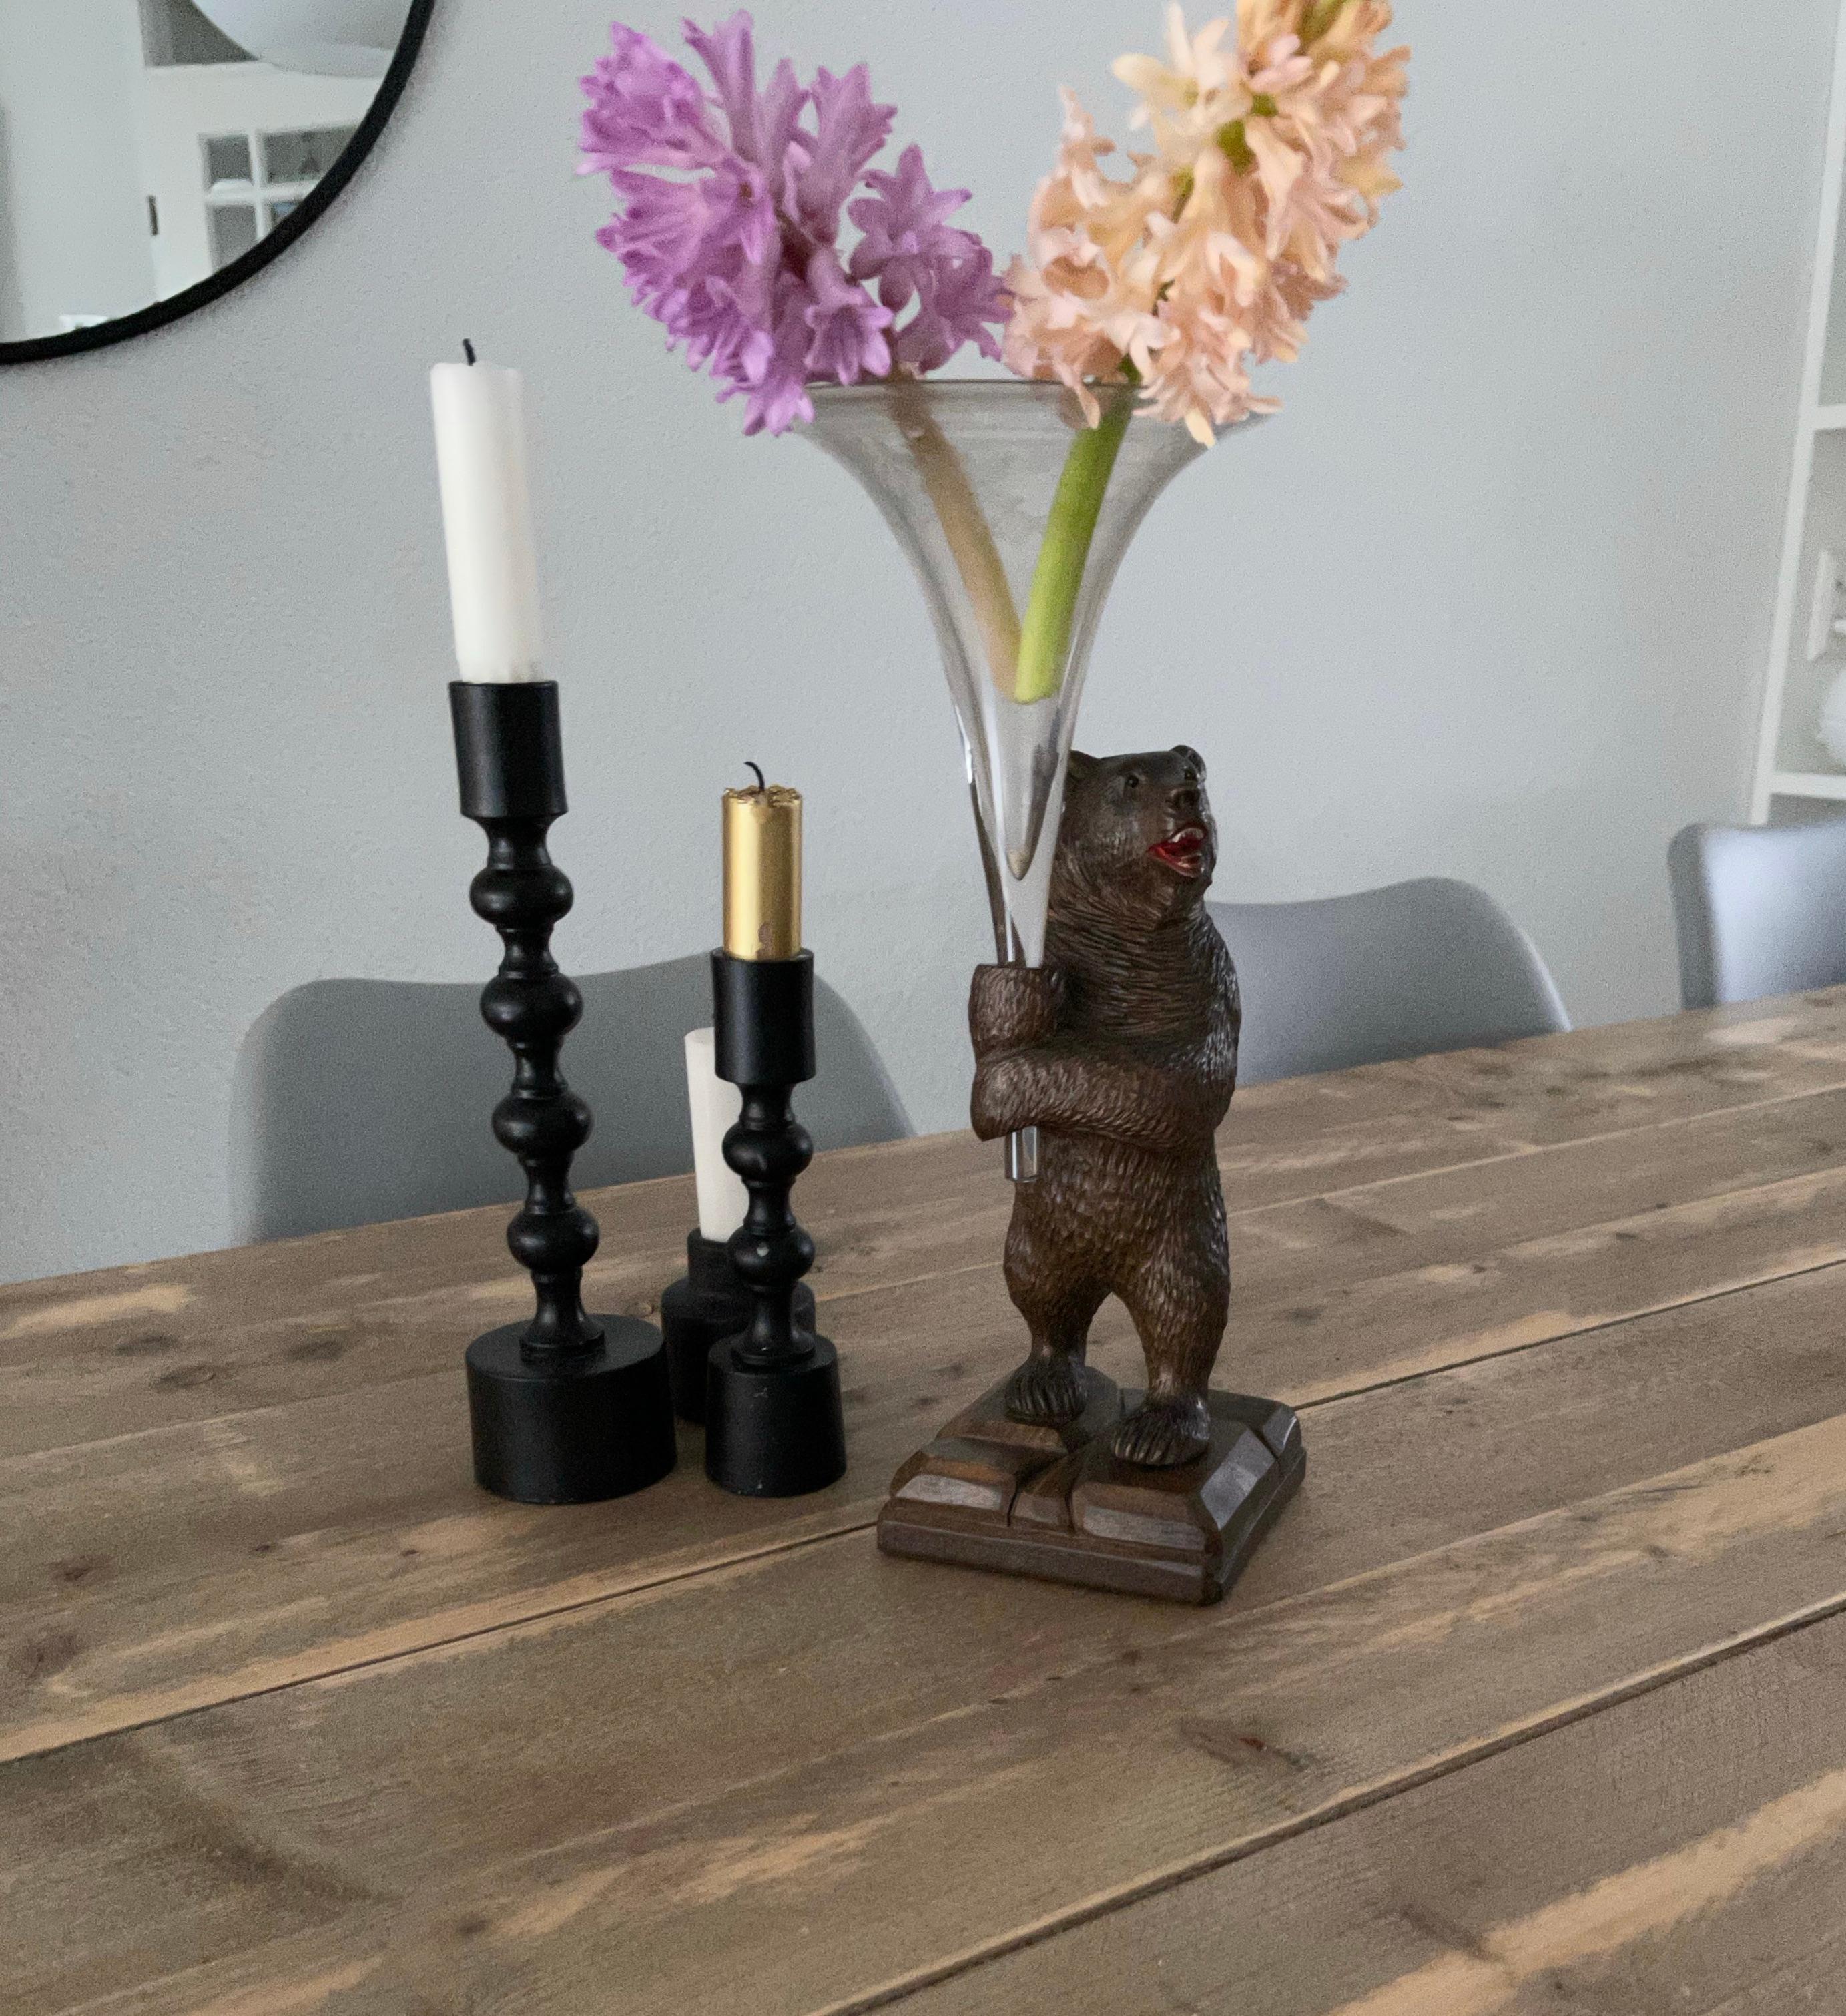 Early 20th century Swiss work of art.

This small and hand-carved bear sculpture is a great example of the Black Forest craftsmanship in early 20th century, Switzerland. Anyone who is capable of carving such fine details into a smaller size